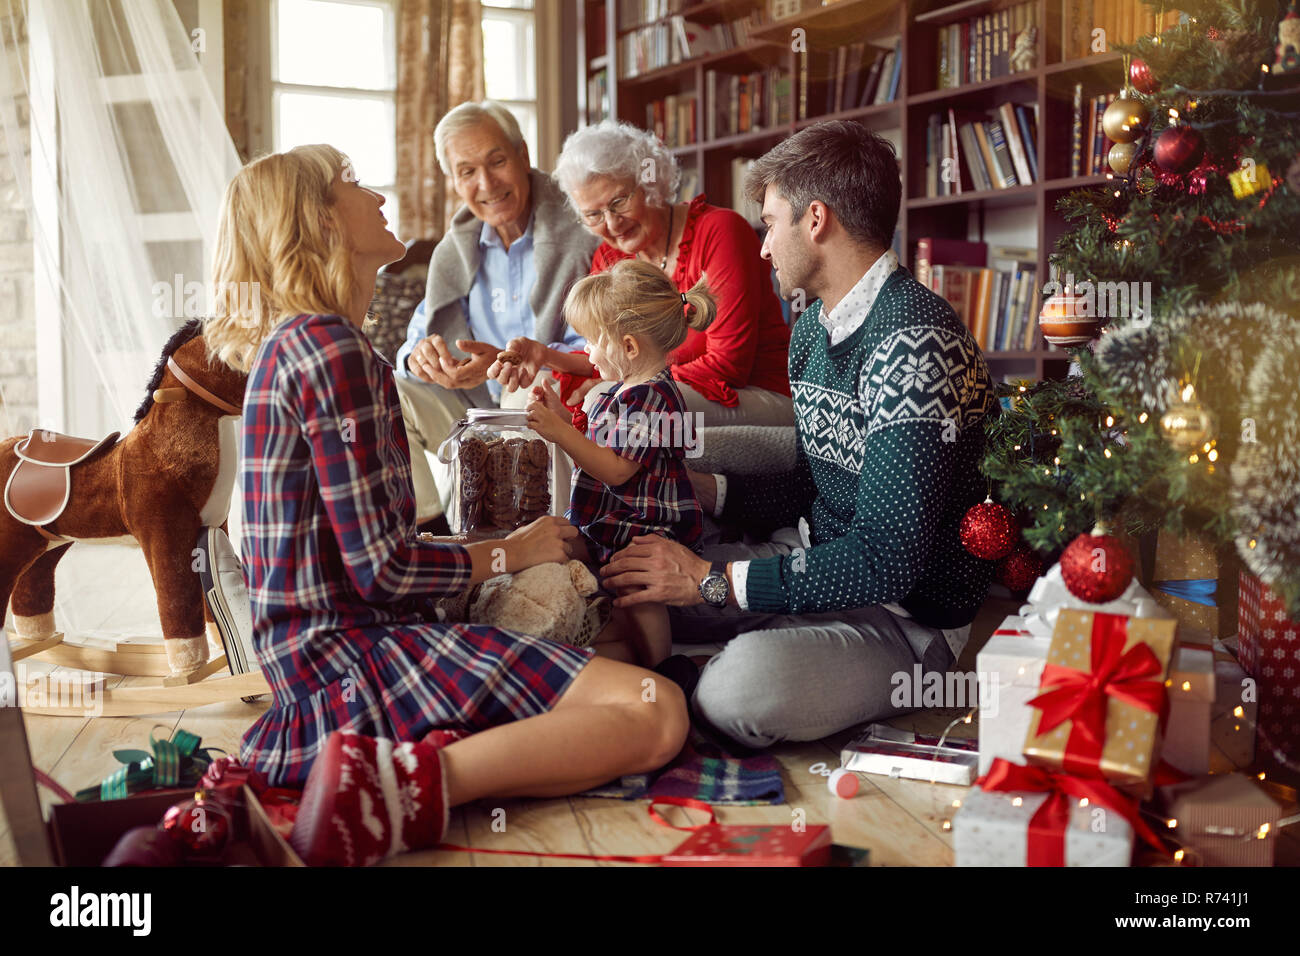 Christmas family portrait - Happy family together in Christmas Stock Photo